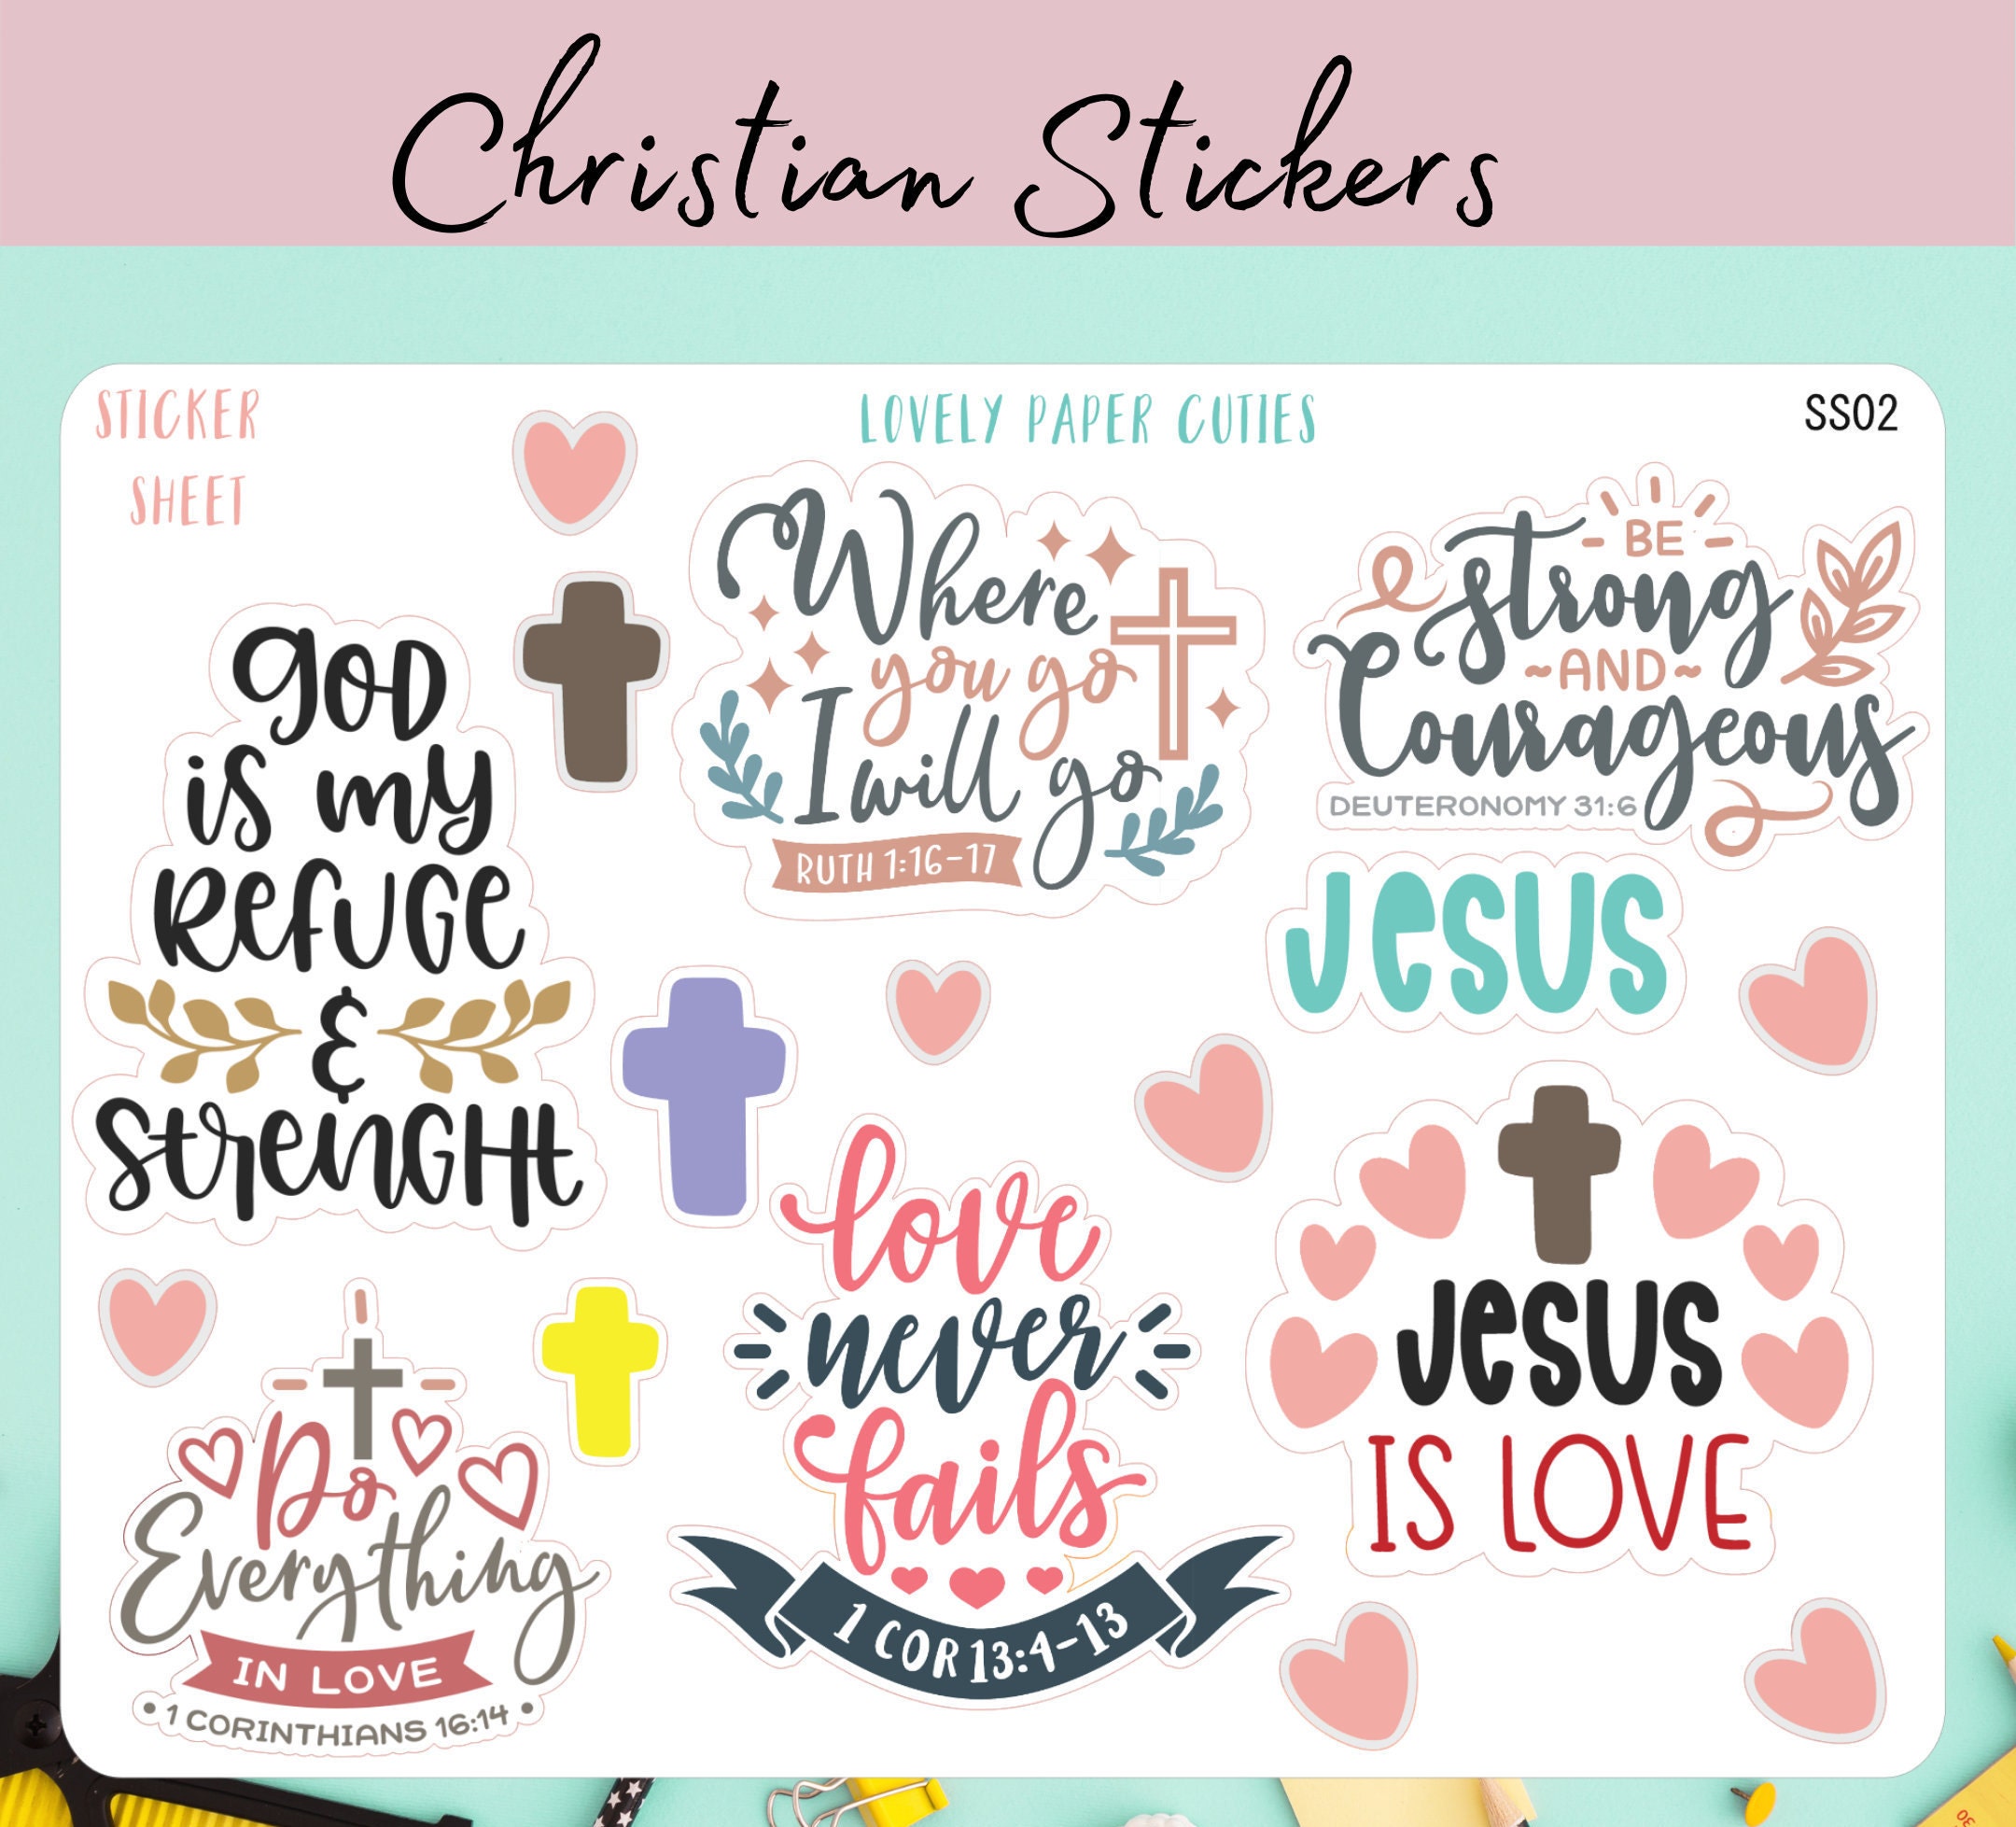 2 Sheet Religious Inspirational Bible Stickers Christian Daily Stickers